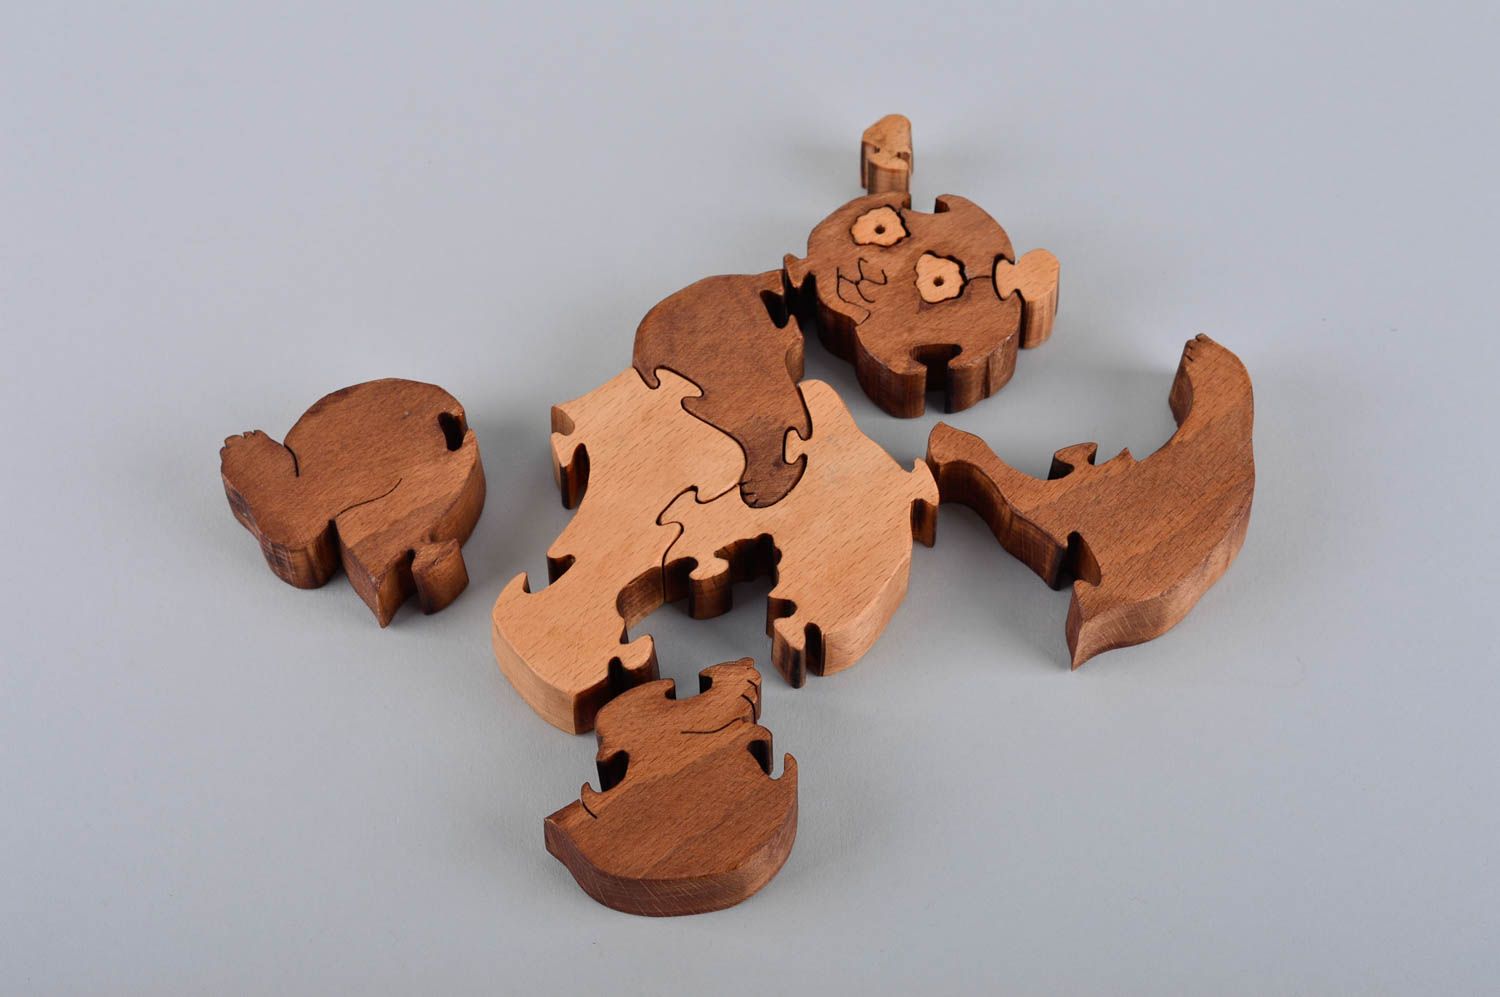 Handmade puzzles unusual toy wooden pazzles designer toy for girls gift ideas photo 5